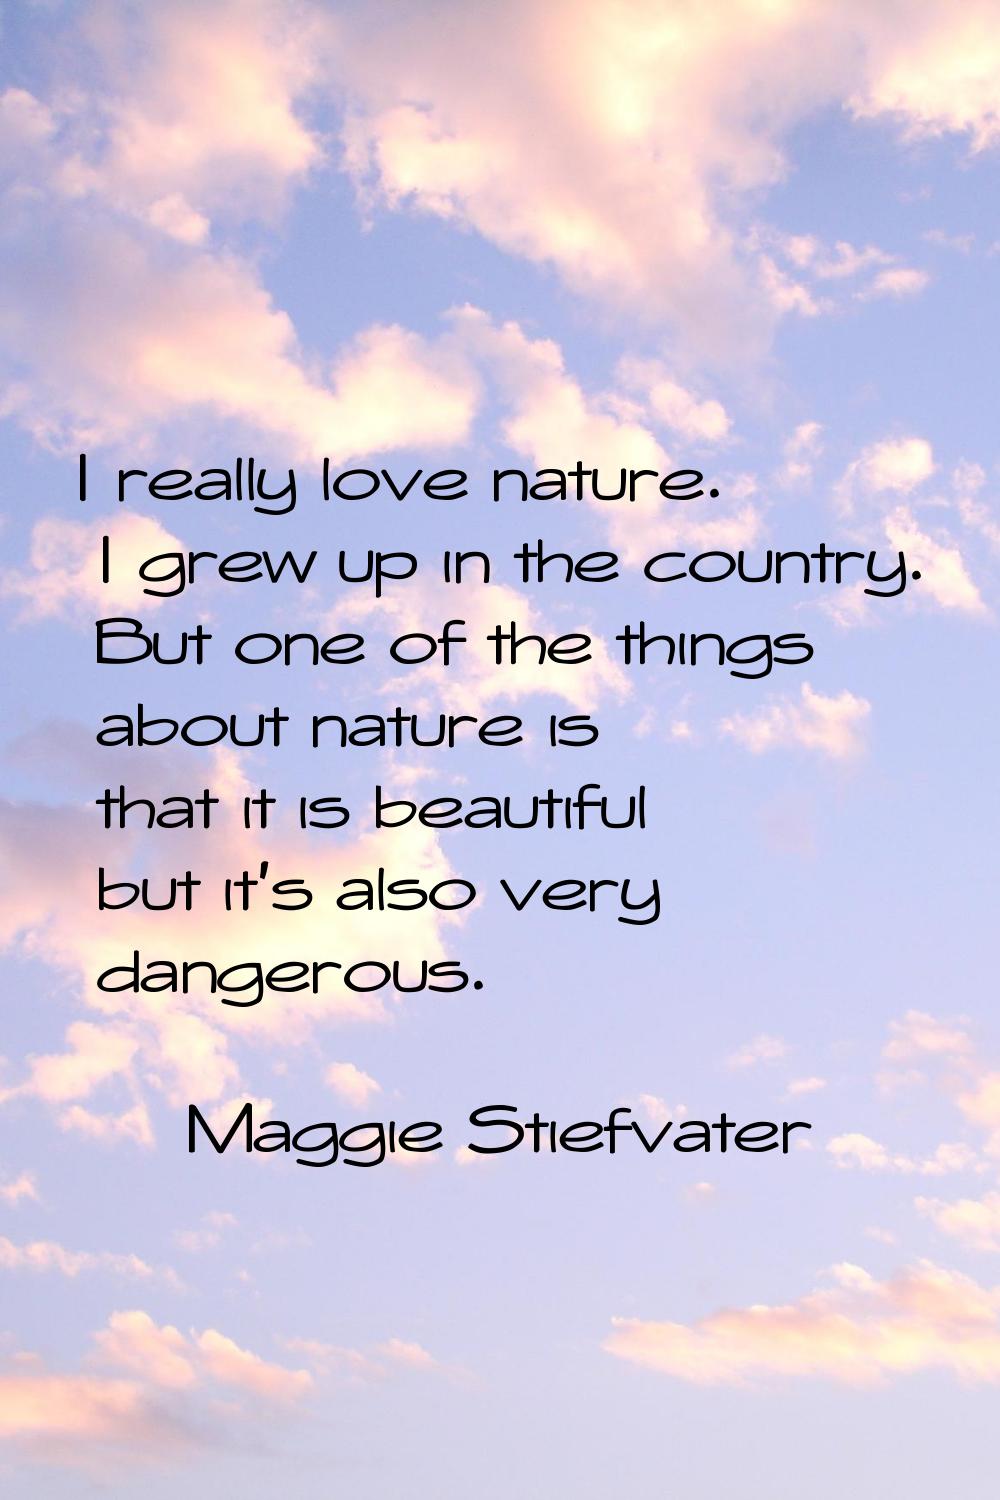 I really love nature. I grew up in the country. But one of the things about nature is that it is be